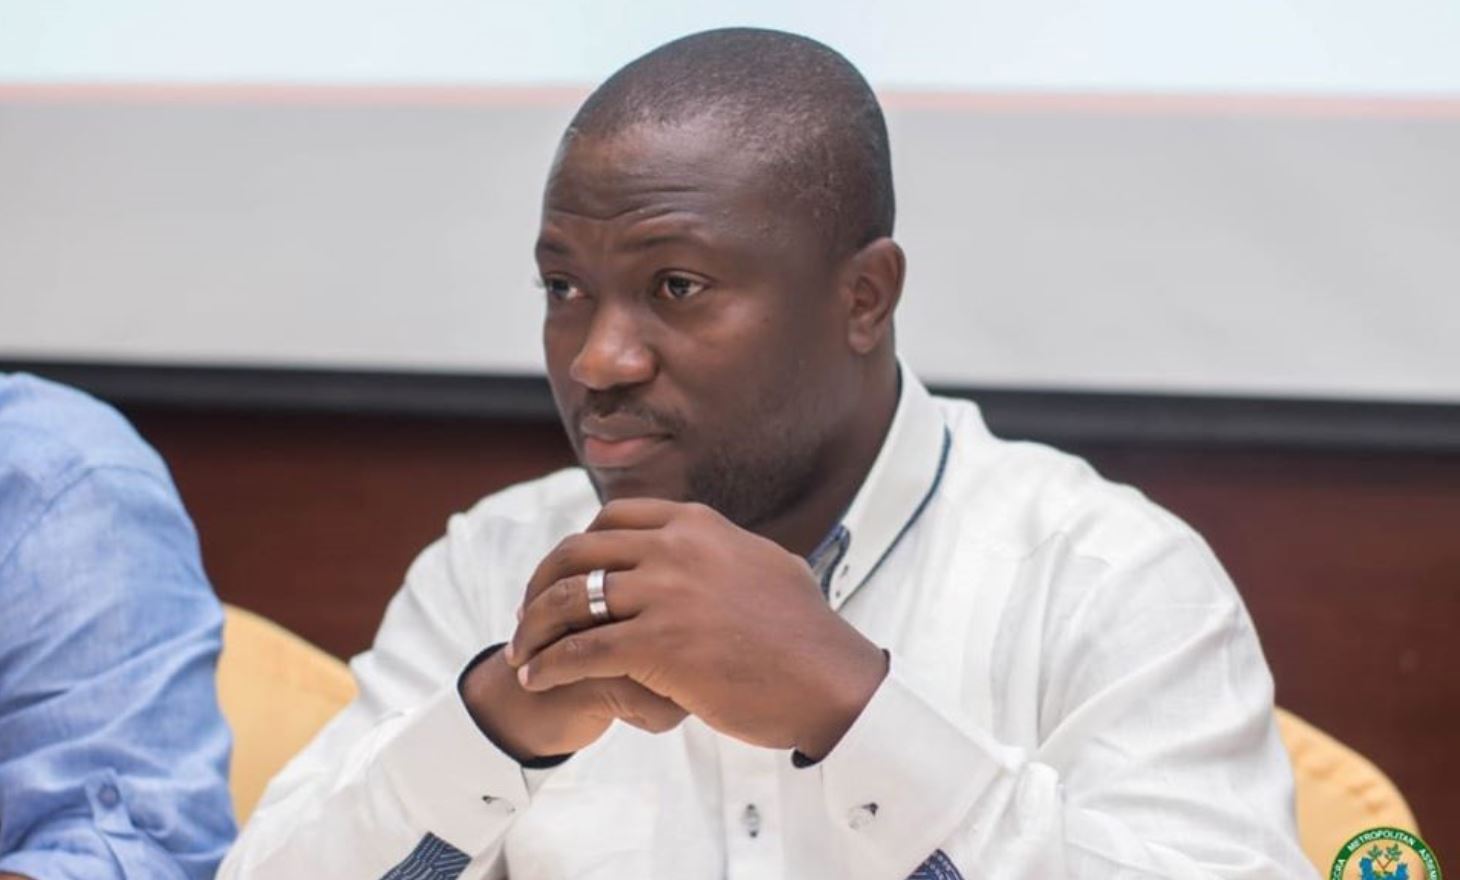 Adjei Sowah risks losing his position as Accra Mayor